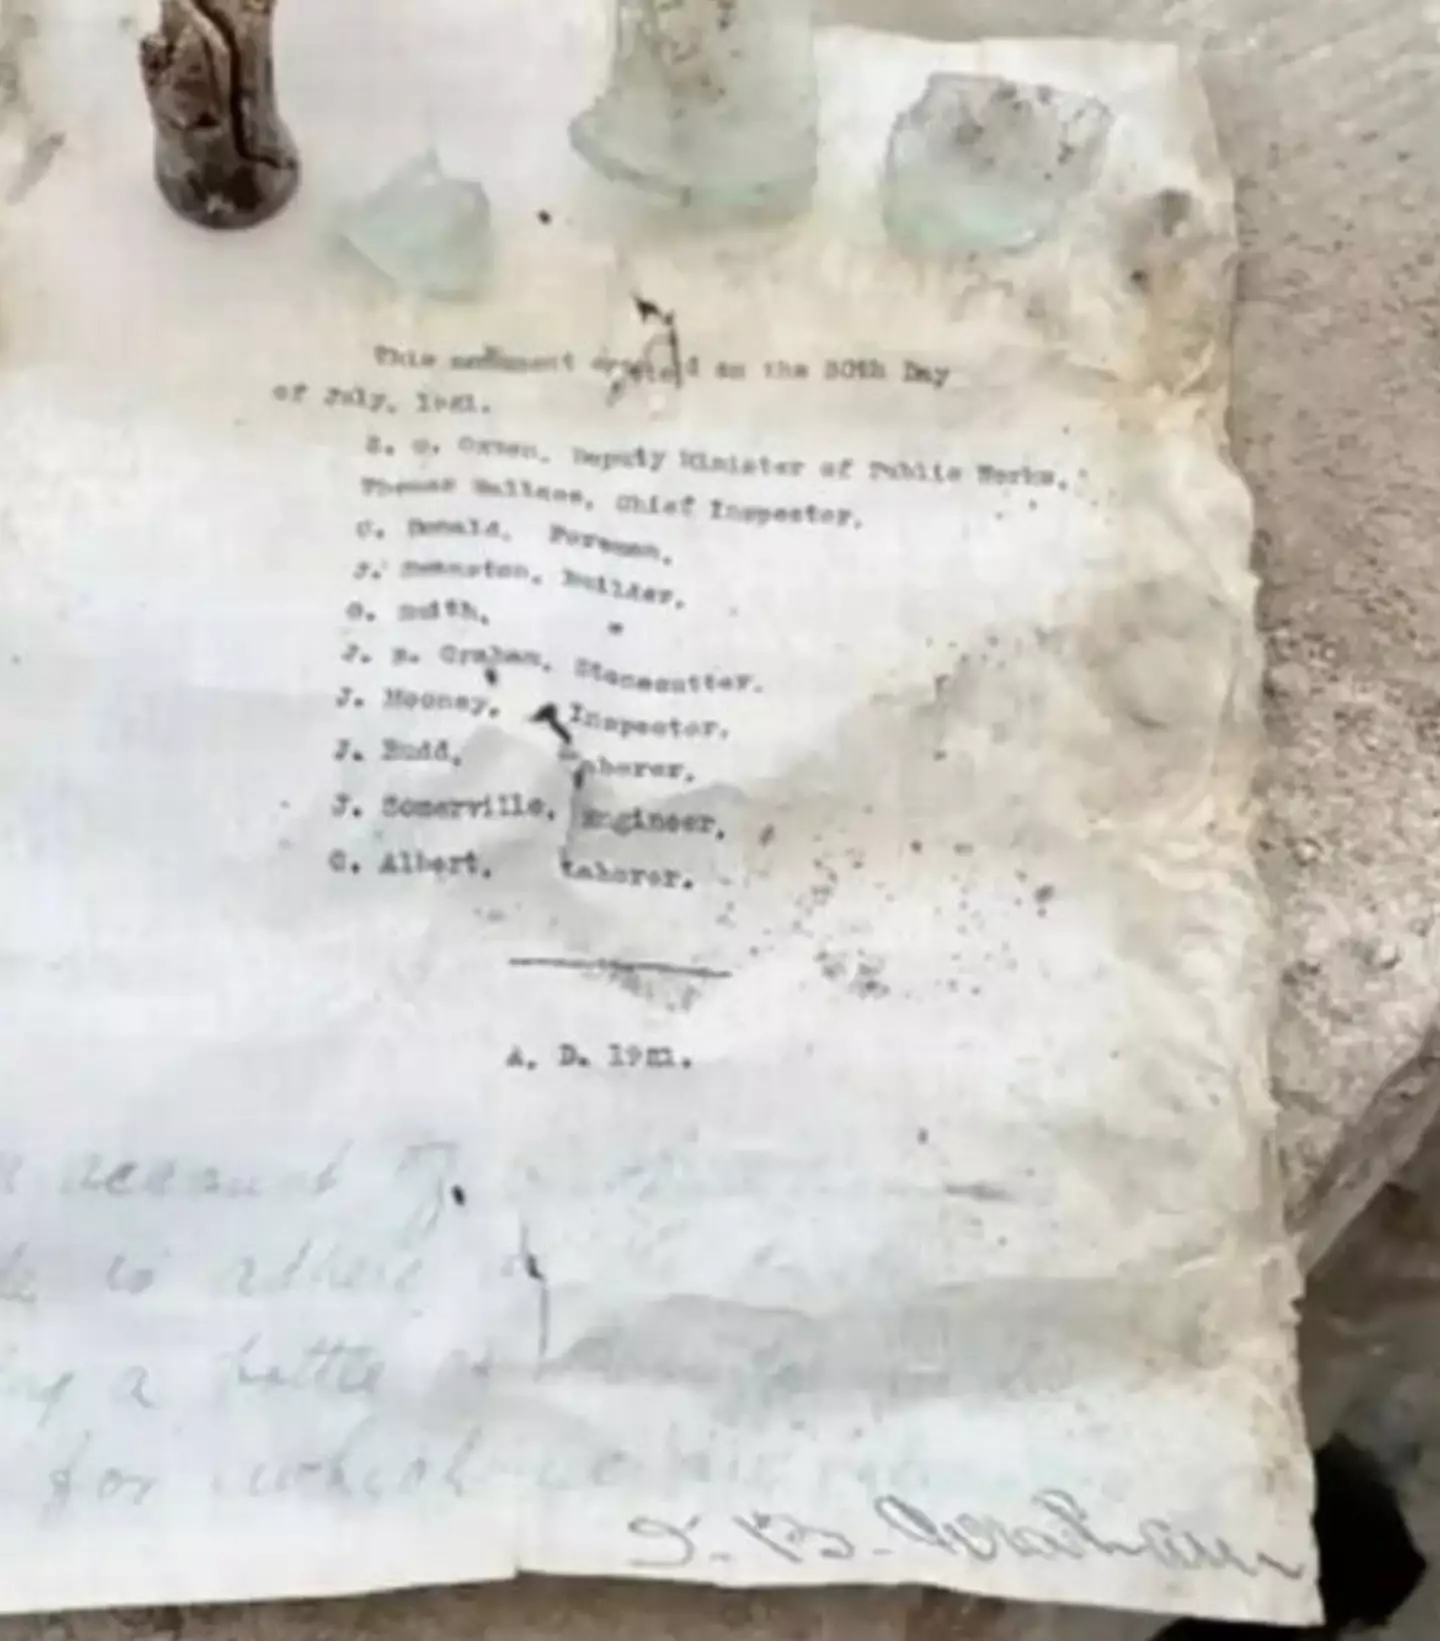 The letter had been hiding in the statue's base for over 100 years.